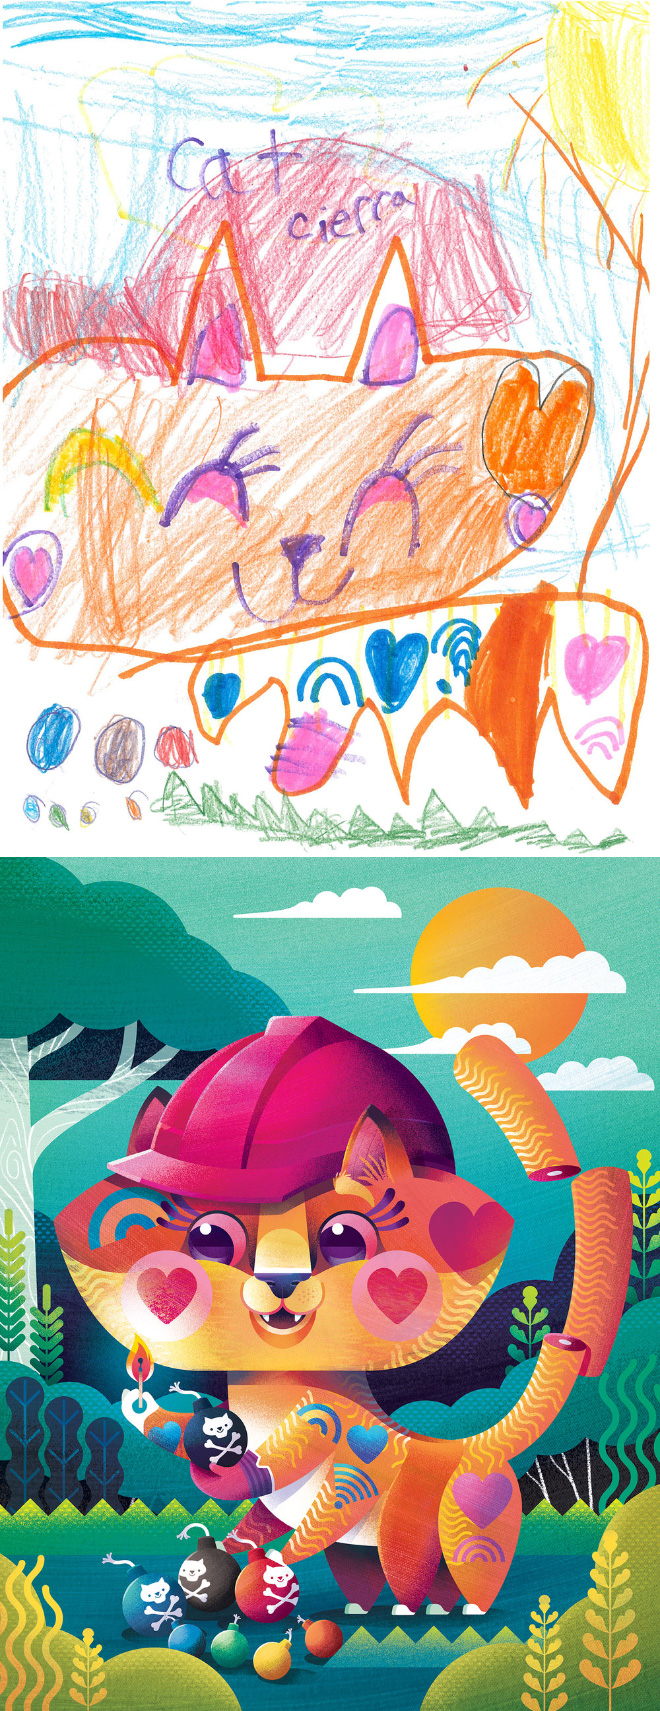 Kids' drawing recreated by a professional artist.